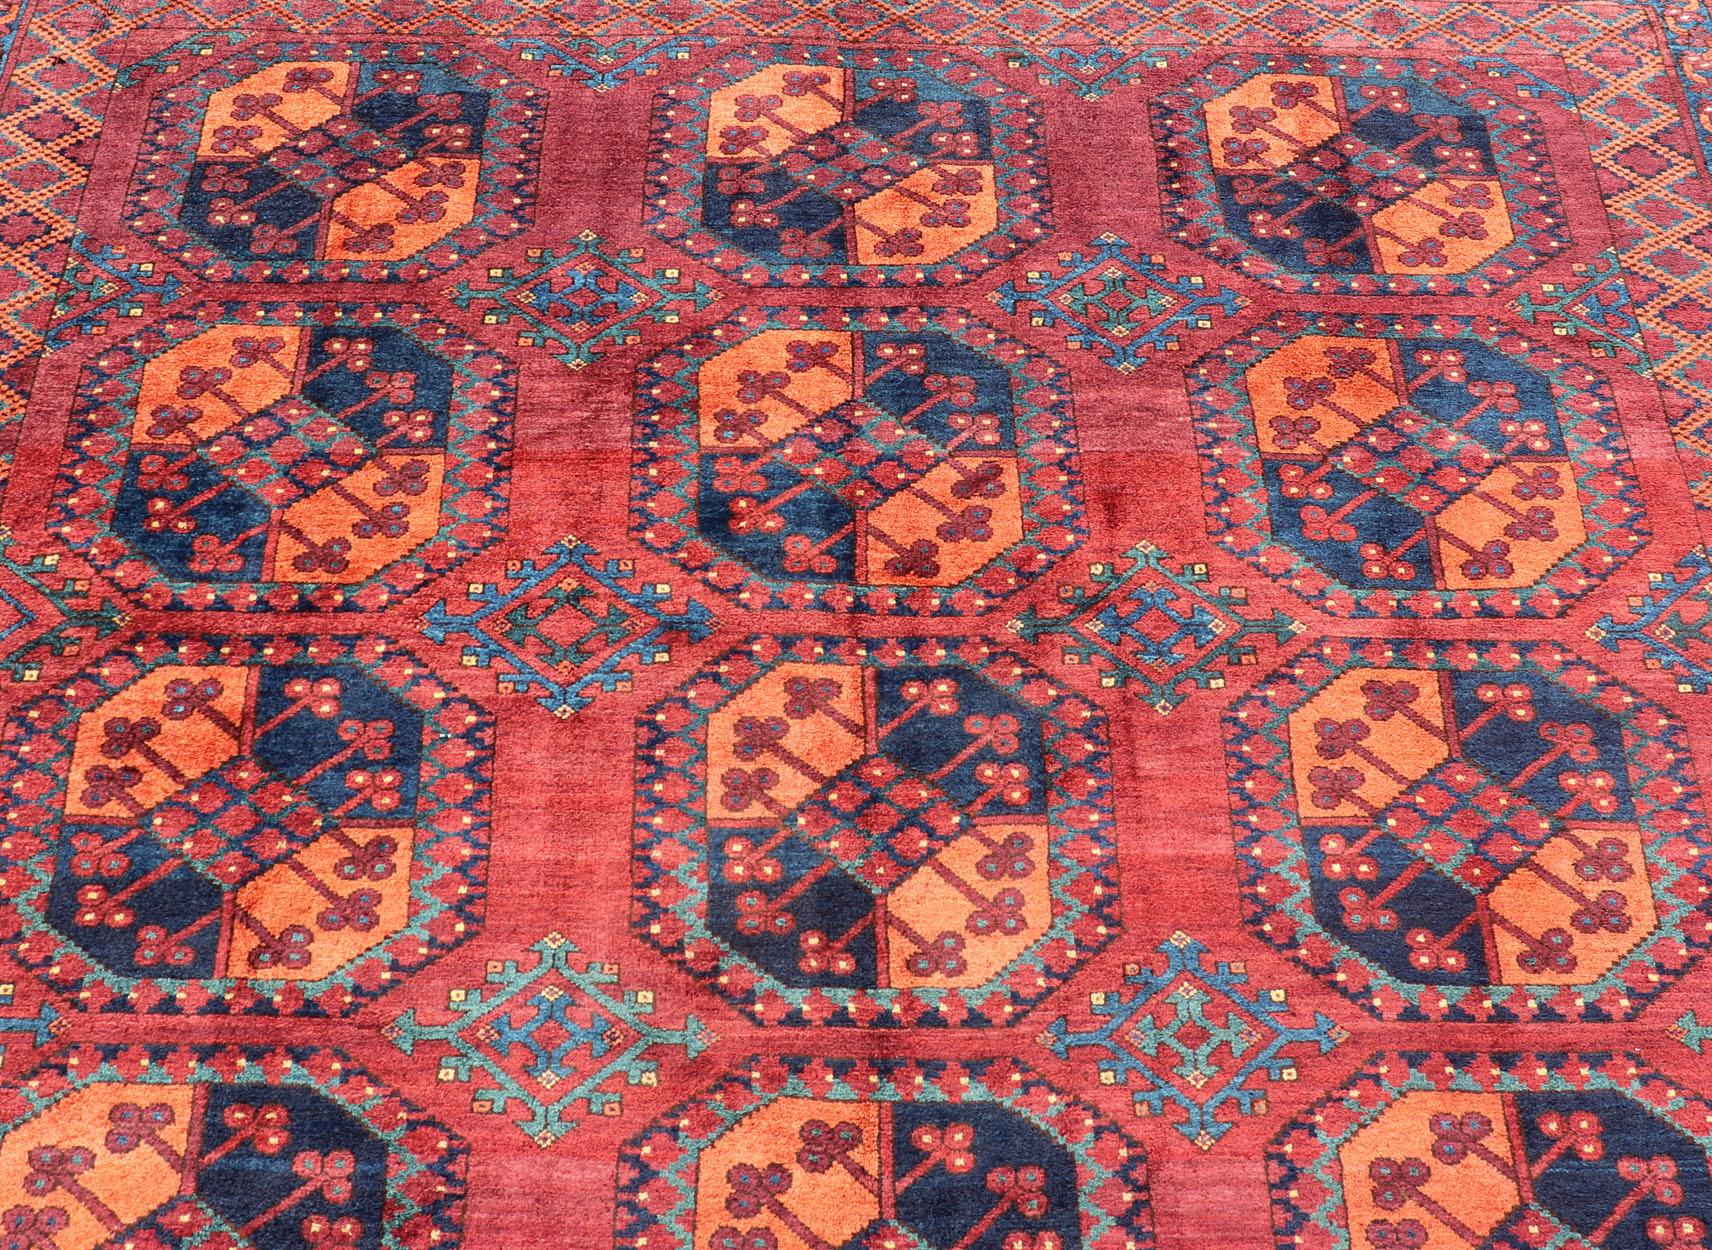 This Turkomen Ersari rug has been hand-knotted in the finest wool. The rug features a repeating sub-geometric Gul design throughout the entirety of the rug, enclosed within a complementary, multi-tiered border, depicting small repeating motifs. The